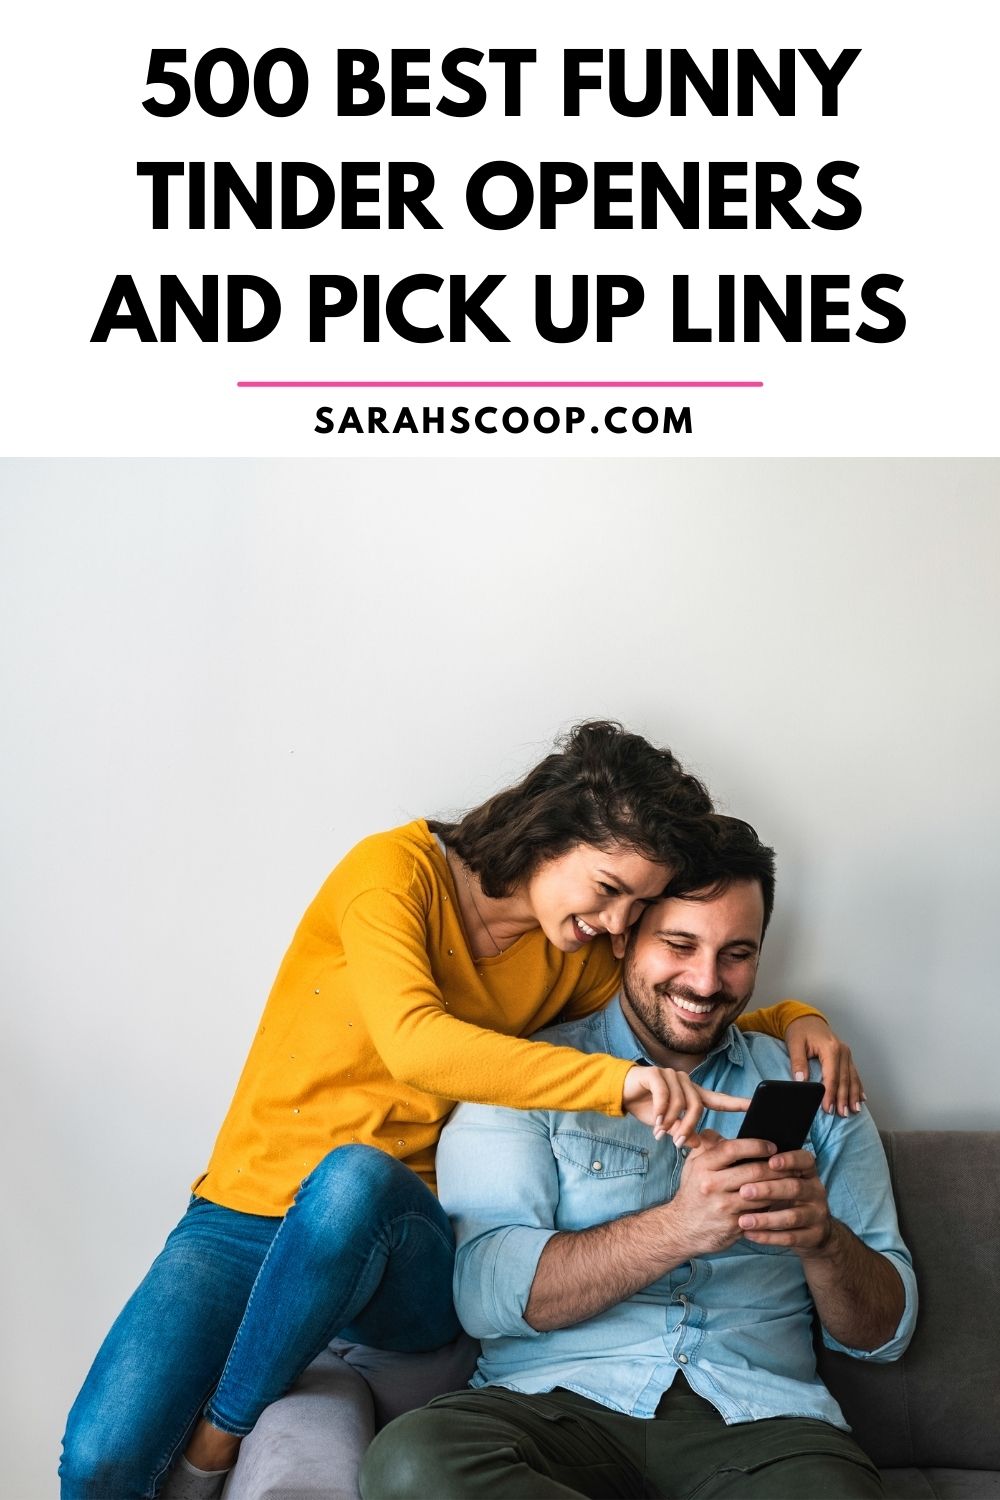 500 Best Funny Tinder Openers and Pick Up Lines - Sarah Scoop